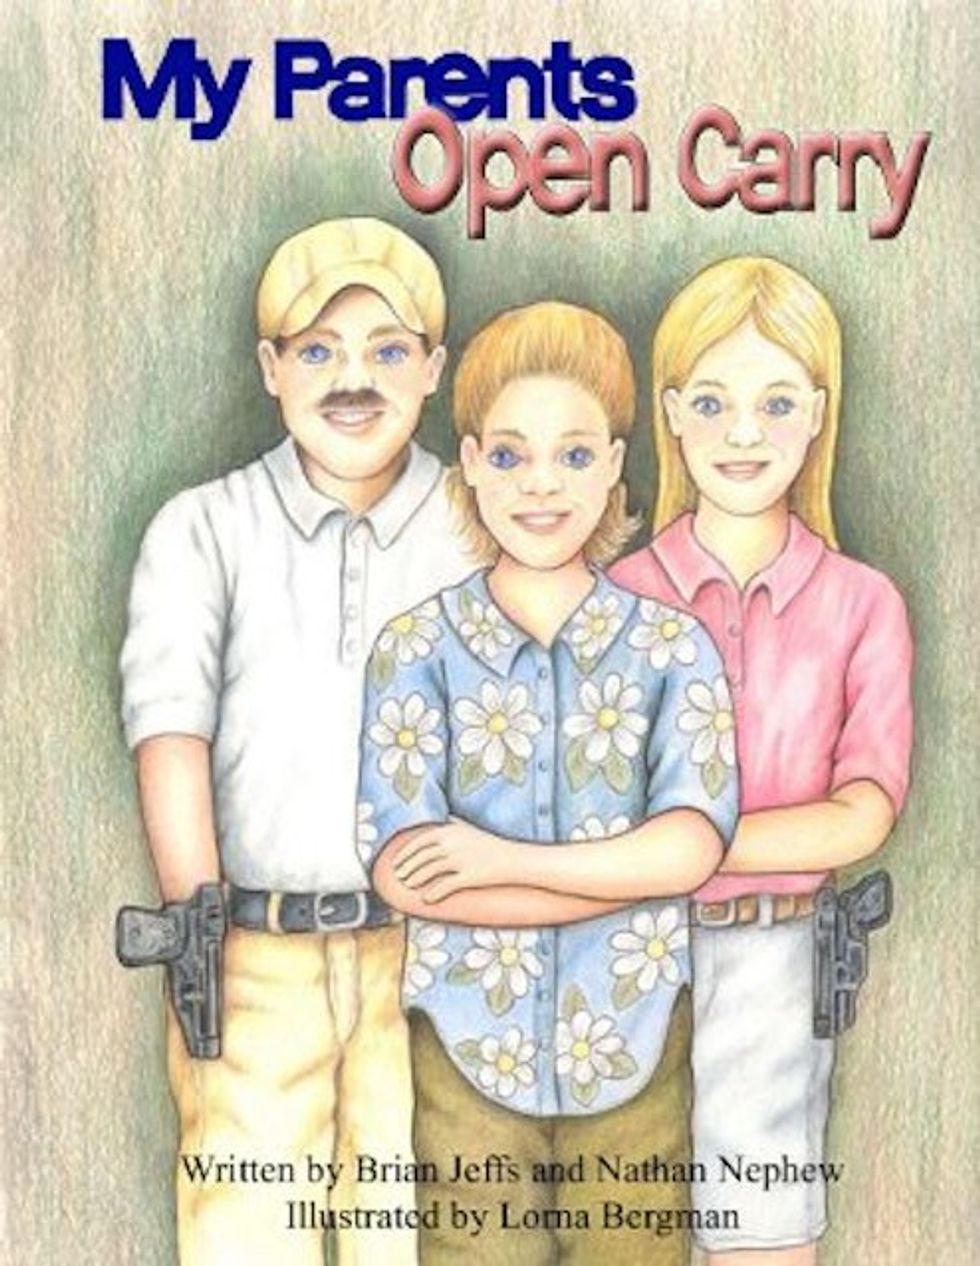 Here Is The Heartwarming Young Adult Open Carry Book You Didn't Know You Needed